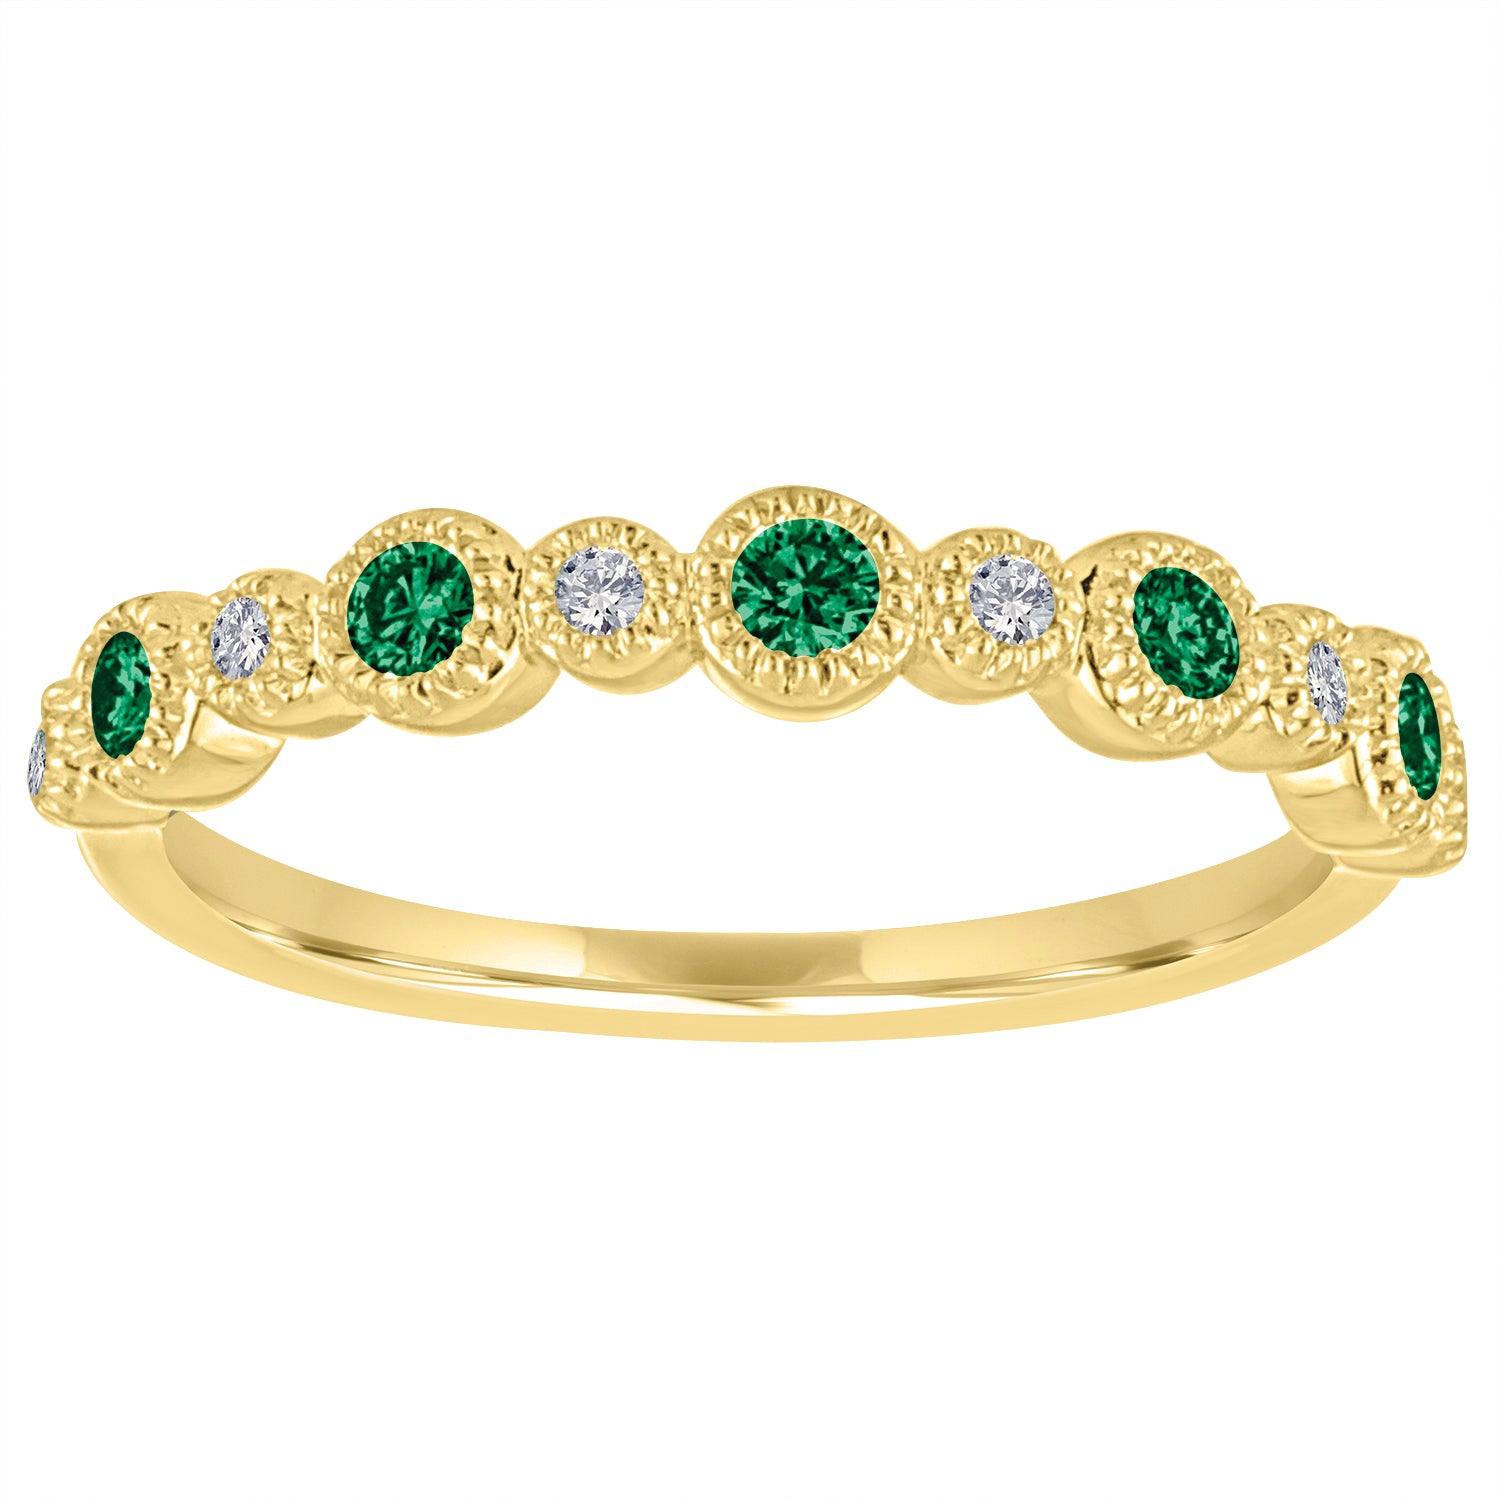 Yellow gold skinny band with large round emeralds and small round diamonds.